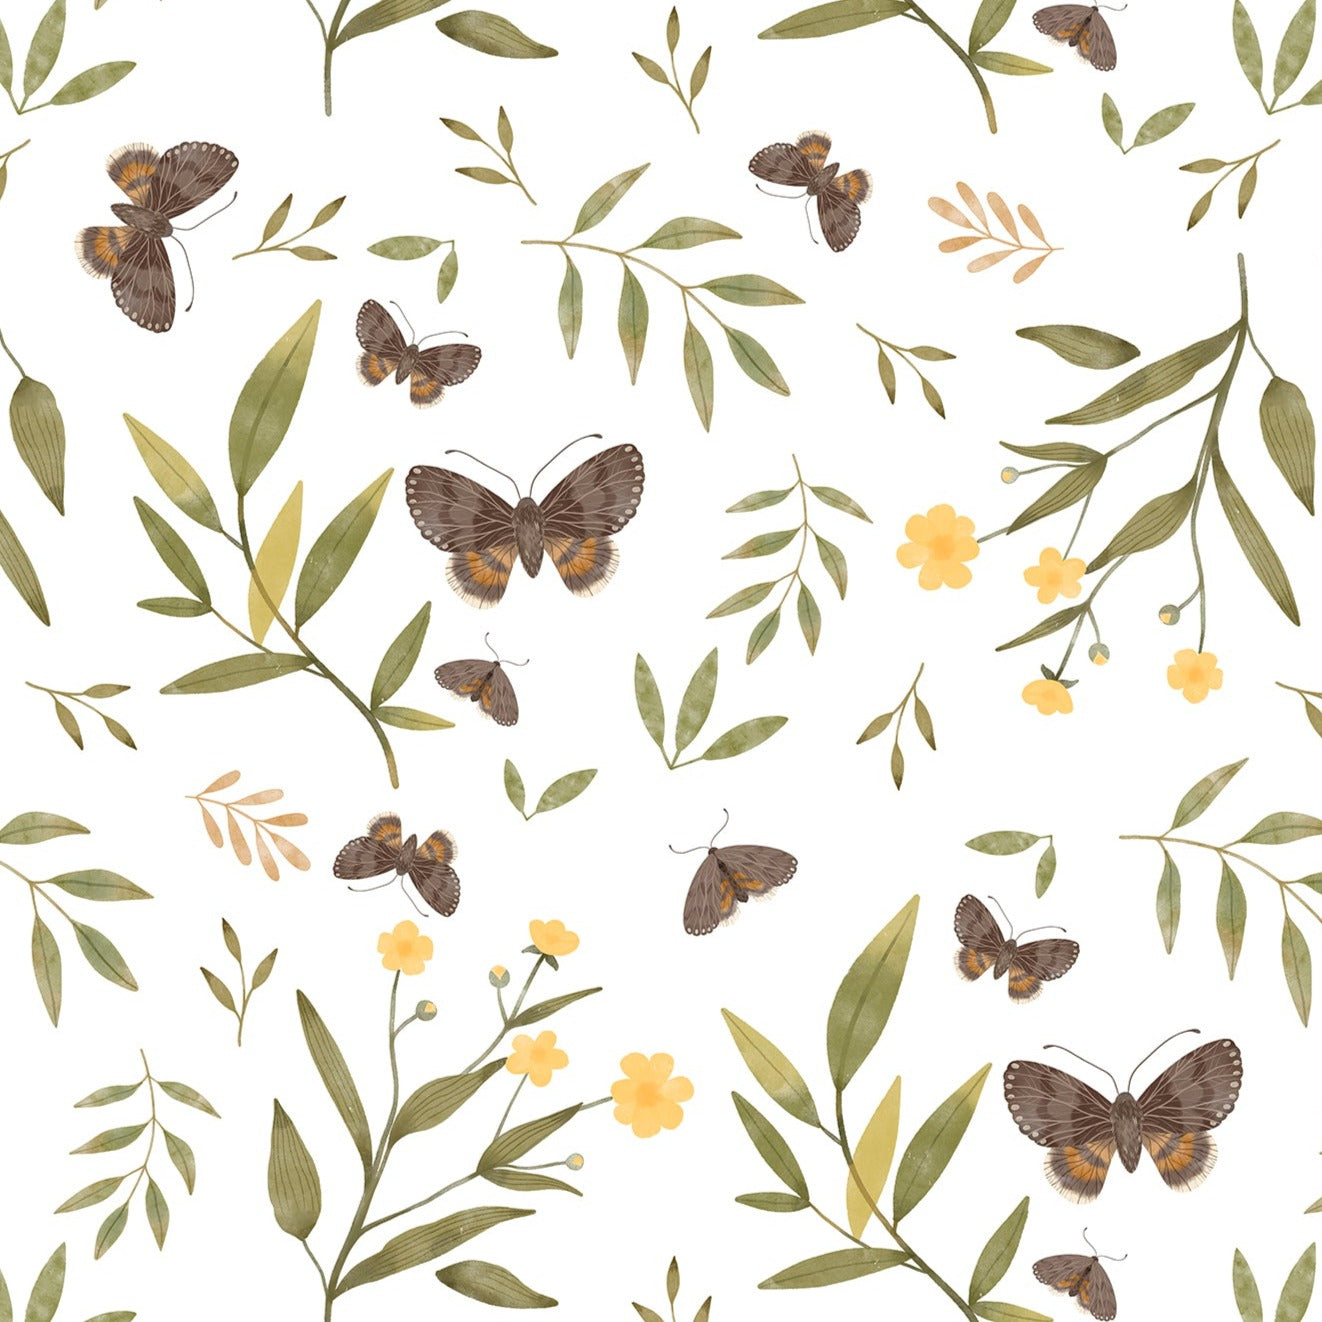 Close-up view of Forest Moth Wallpaper featuring delicate moths in various shades of brown, interspersed with green leaves and yellow flowers on a light background. This design captures the serene beauty of a woodland scene.